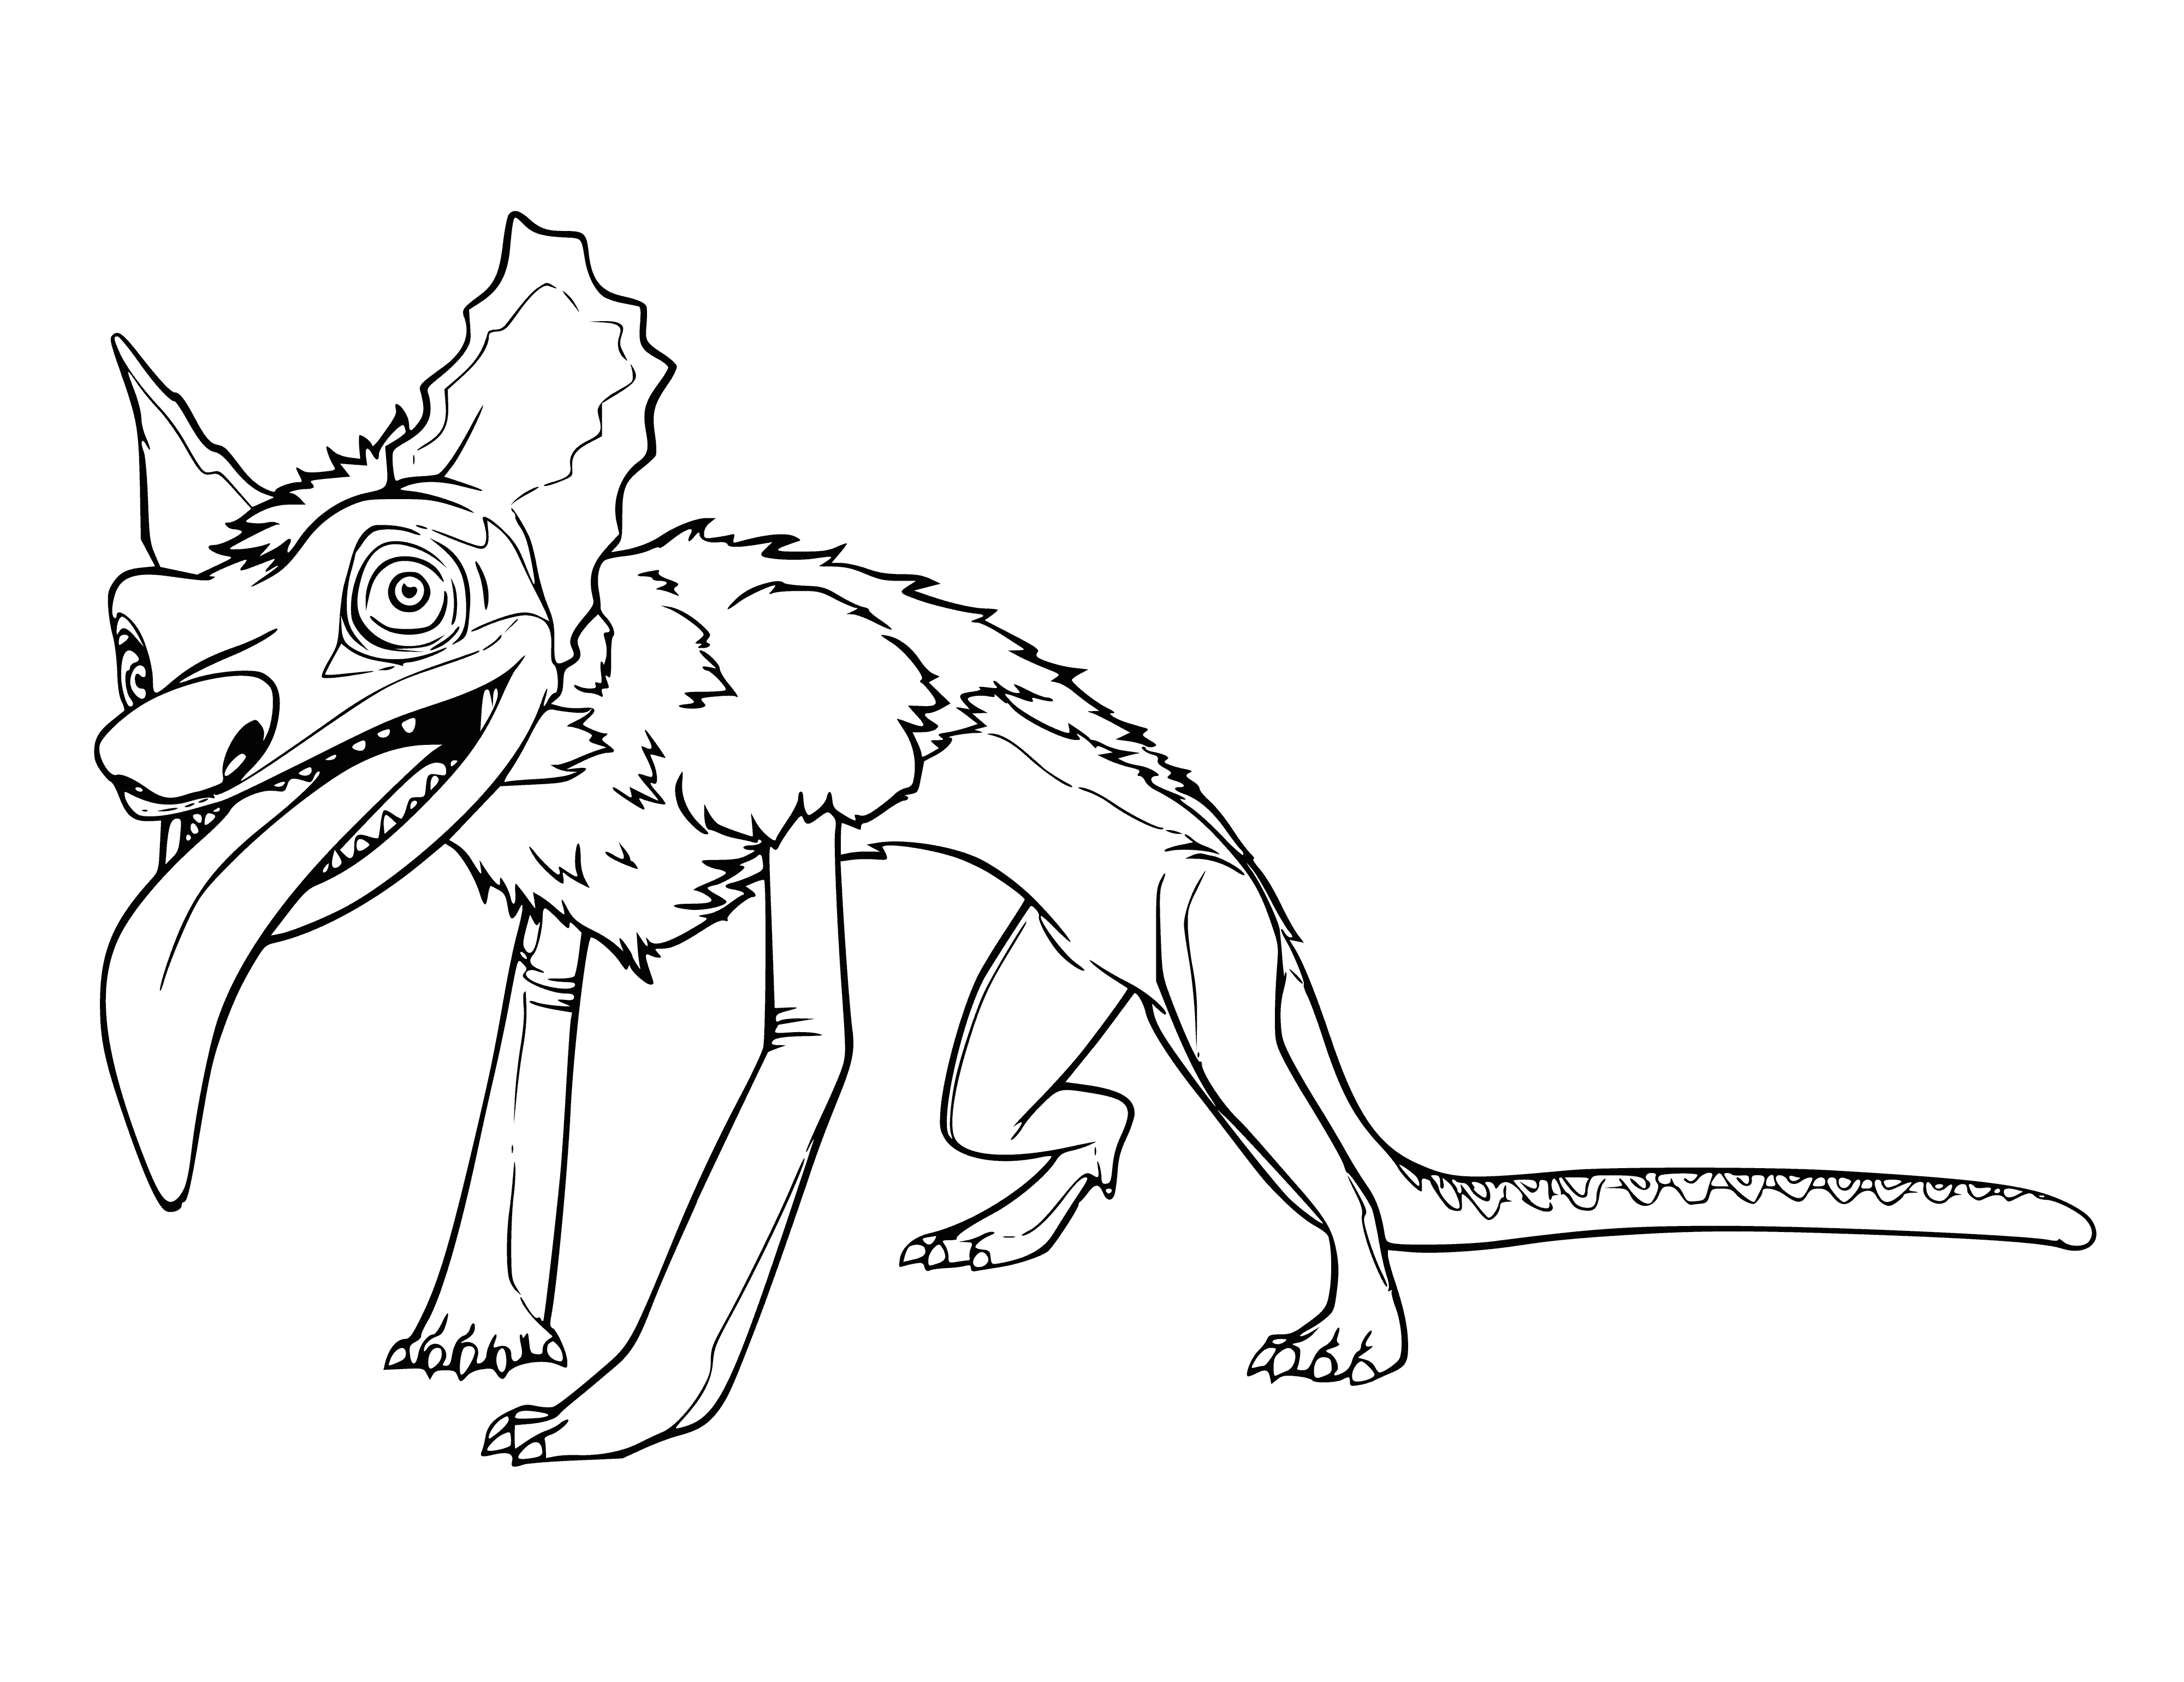 Lizard coloring page